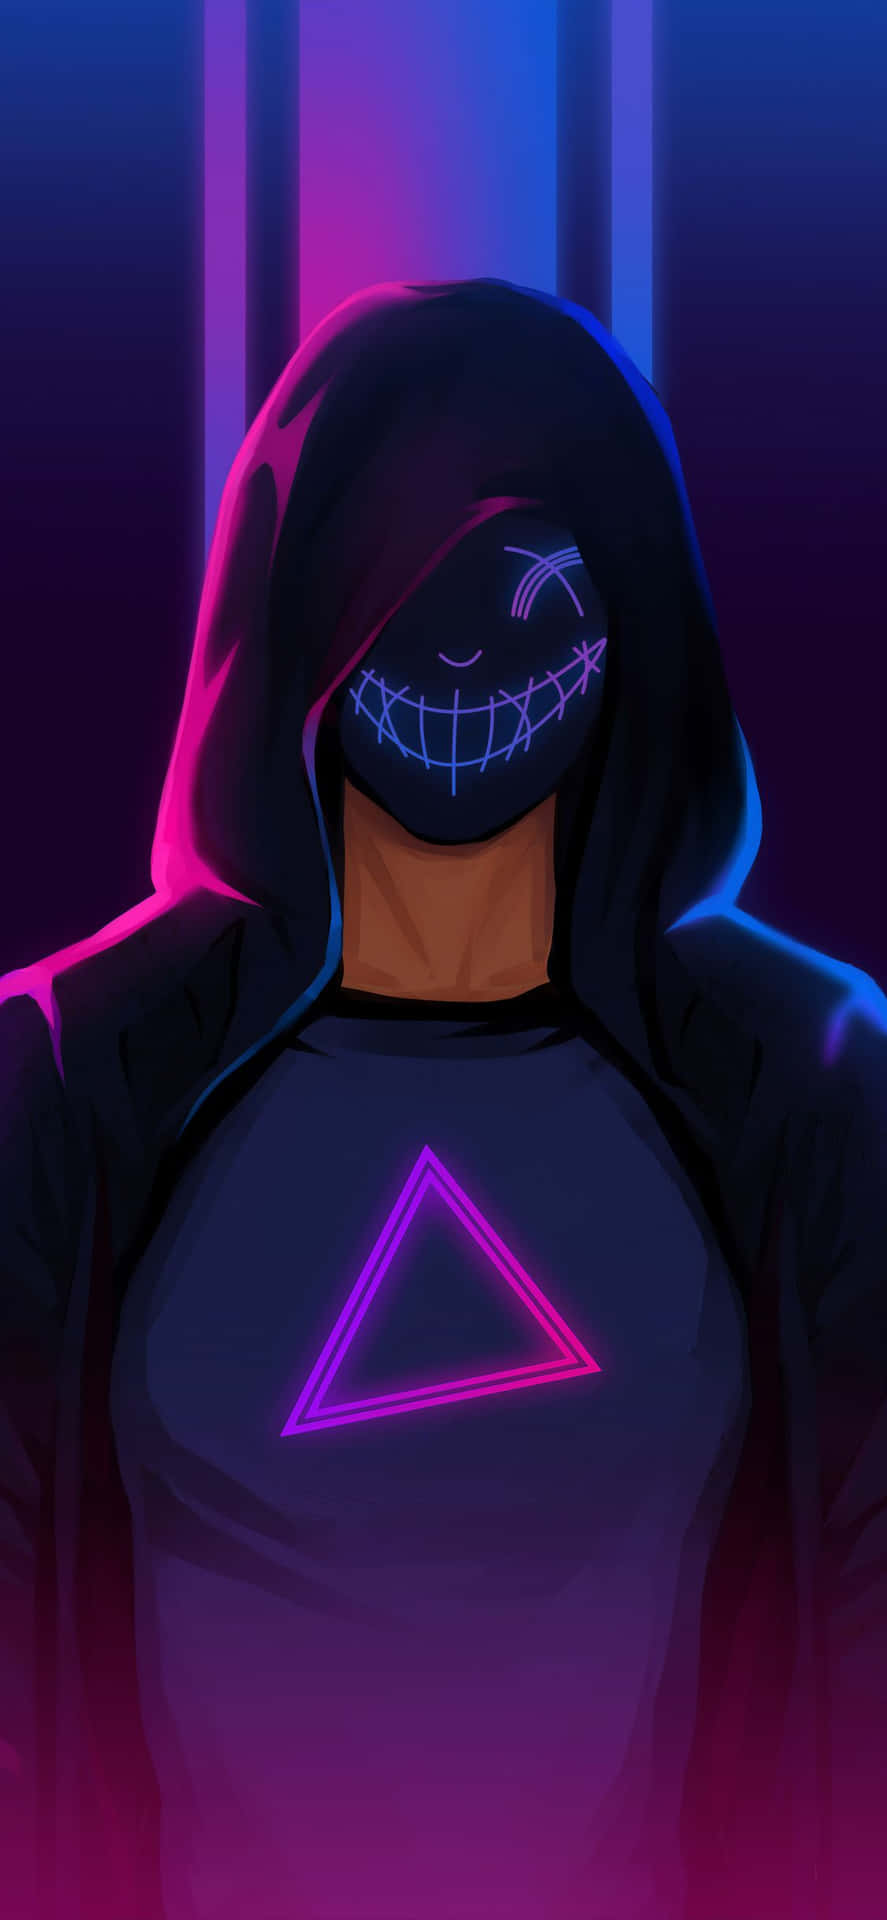 Anime Neon Boy With Mask Background